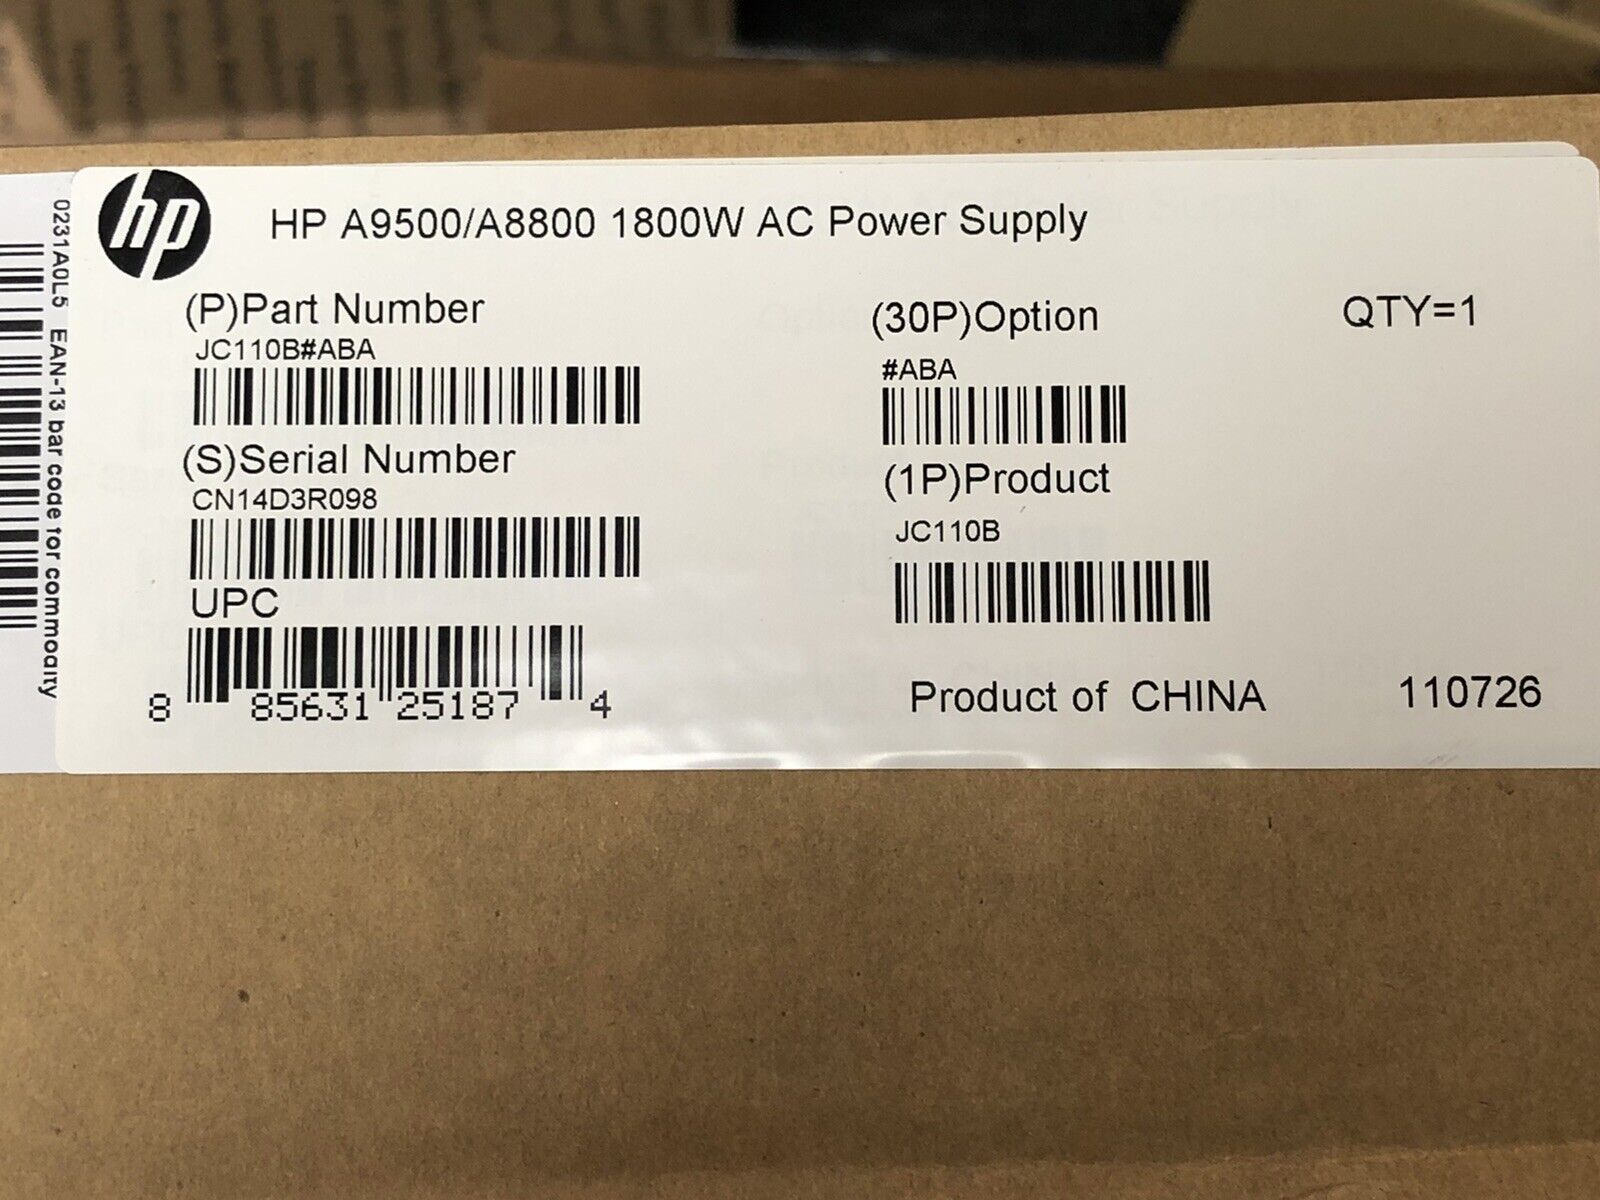 HP H3C JC110B A9500 Switch A8800 Router Series 1800W AC Power Supply PSU S9500E 1.8kW.